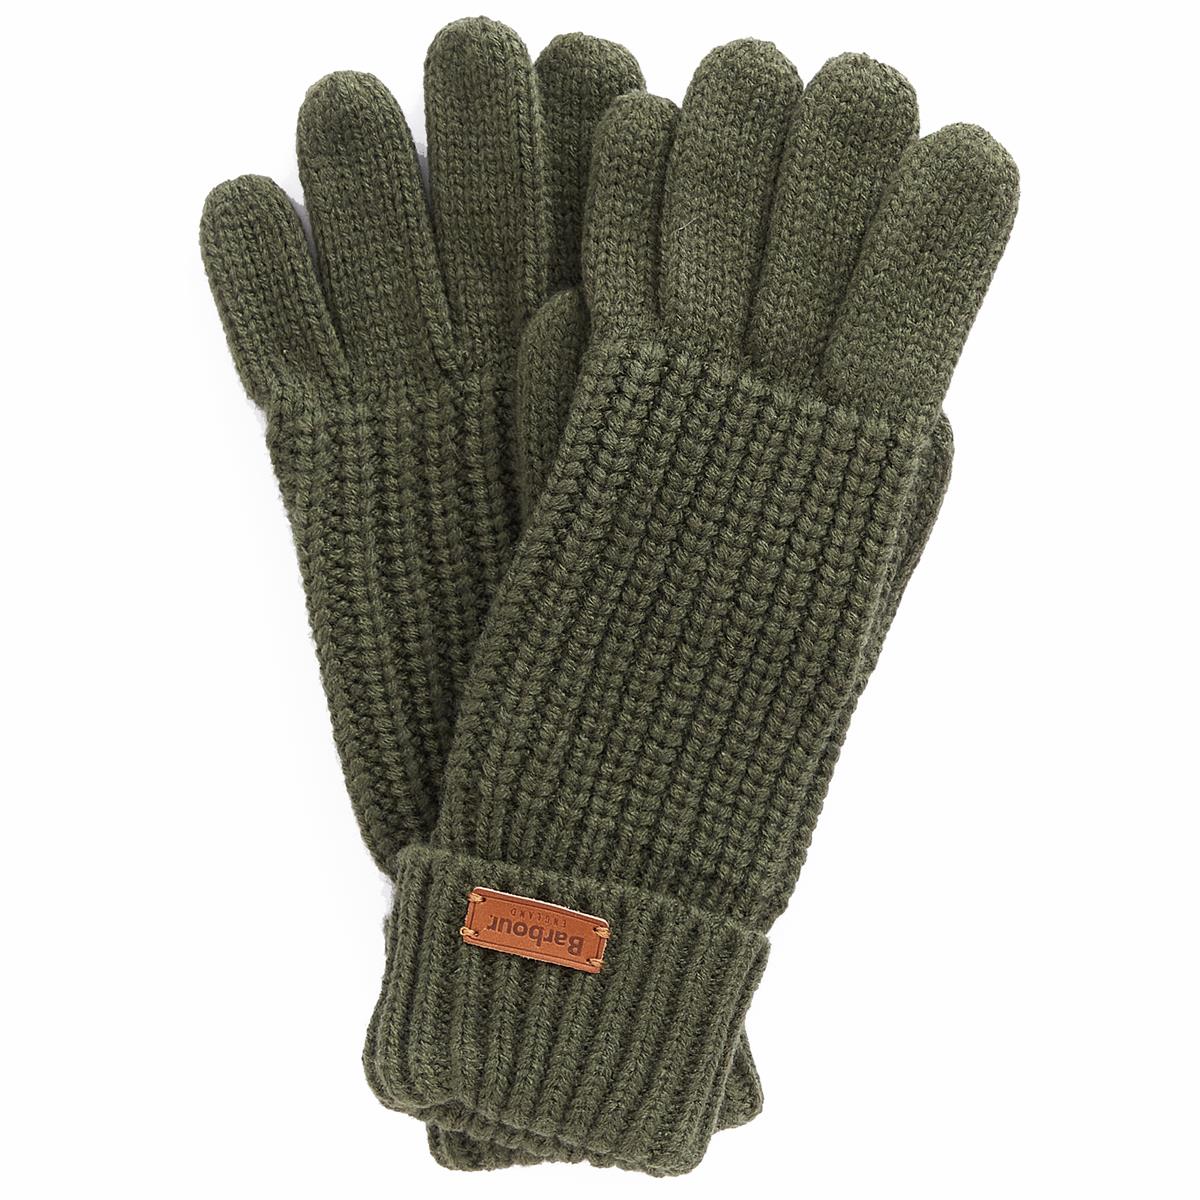 What type of fabric is used in the Barbour Women's Saltburn Knitted Gloves?